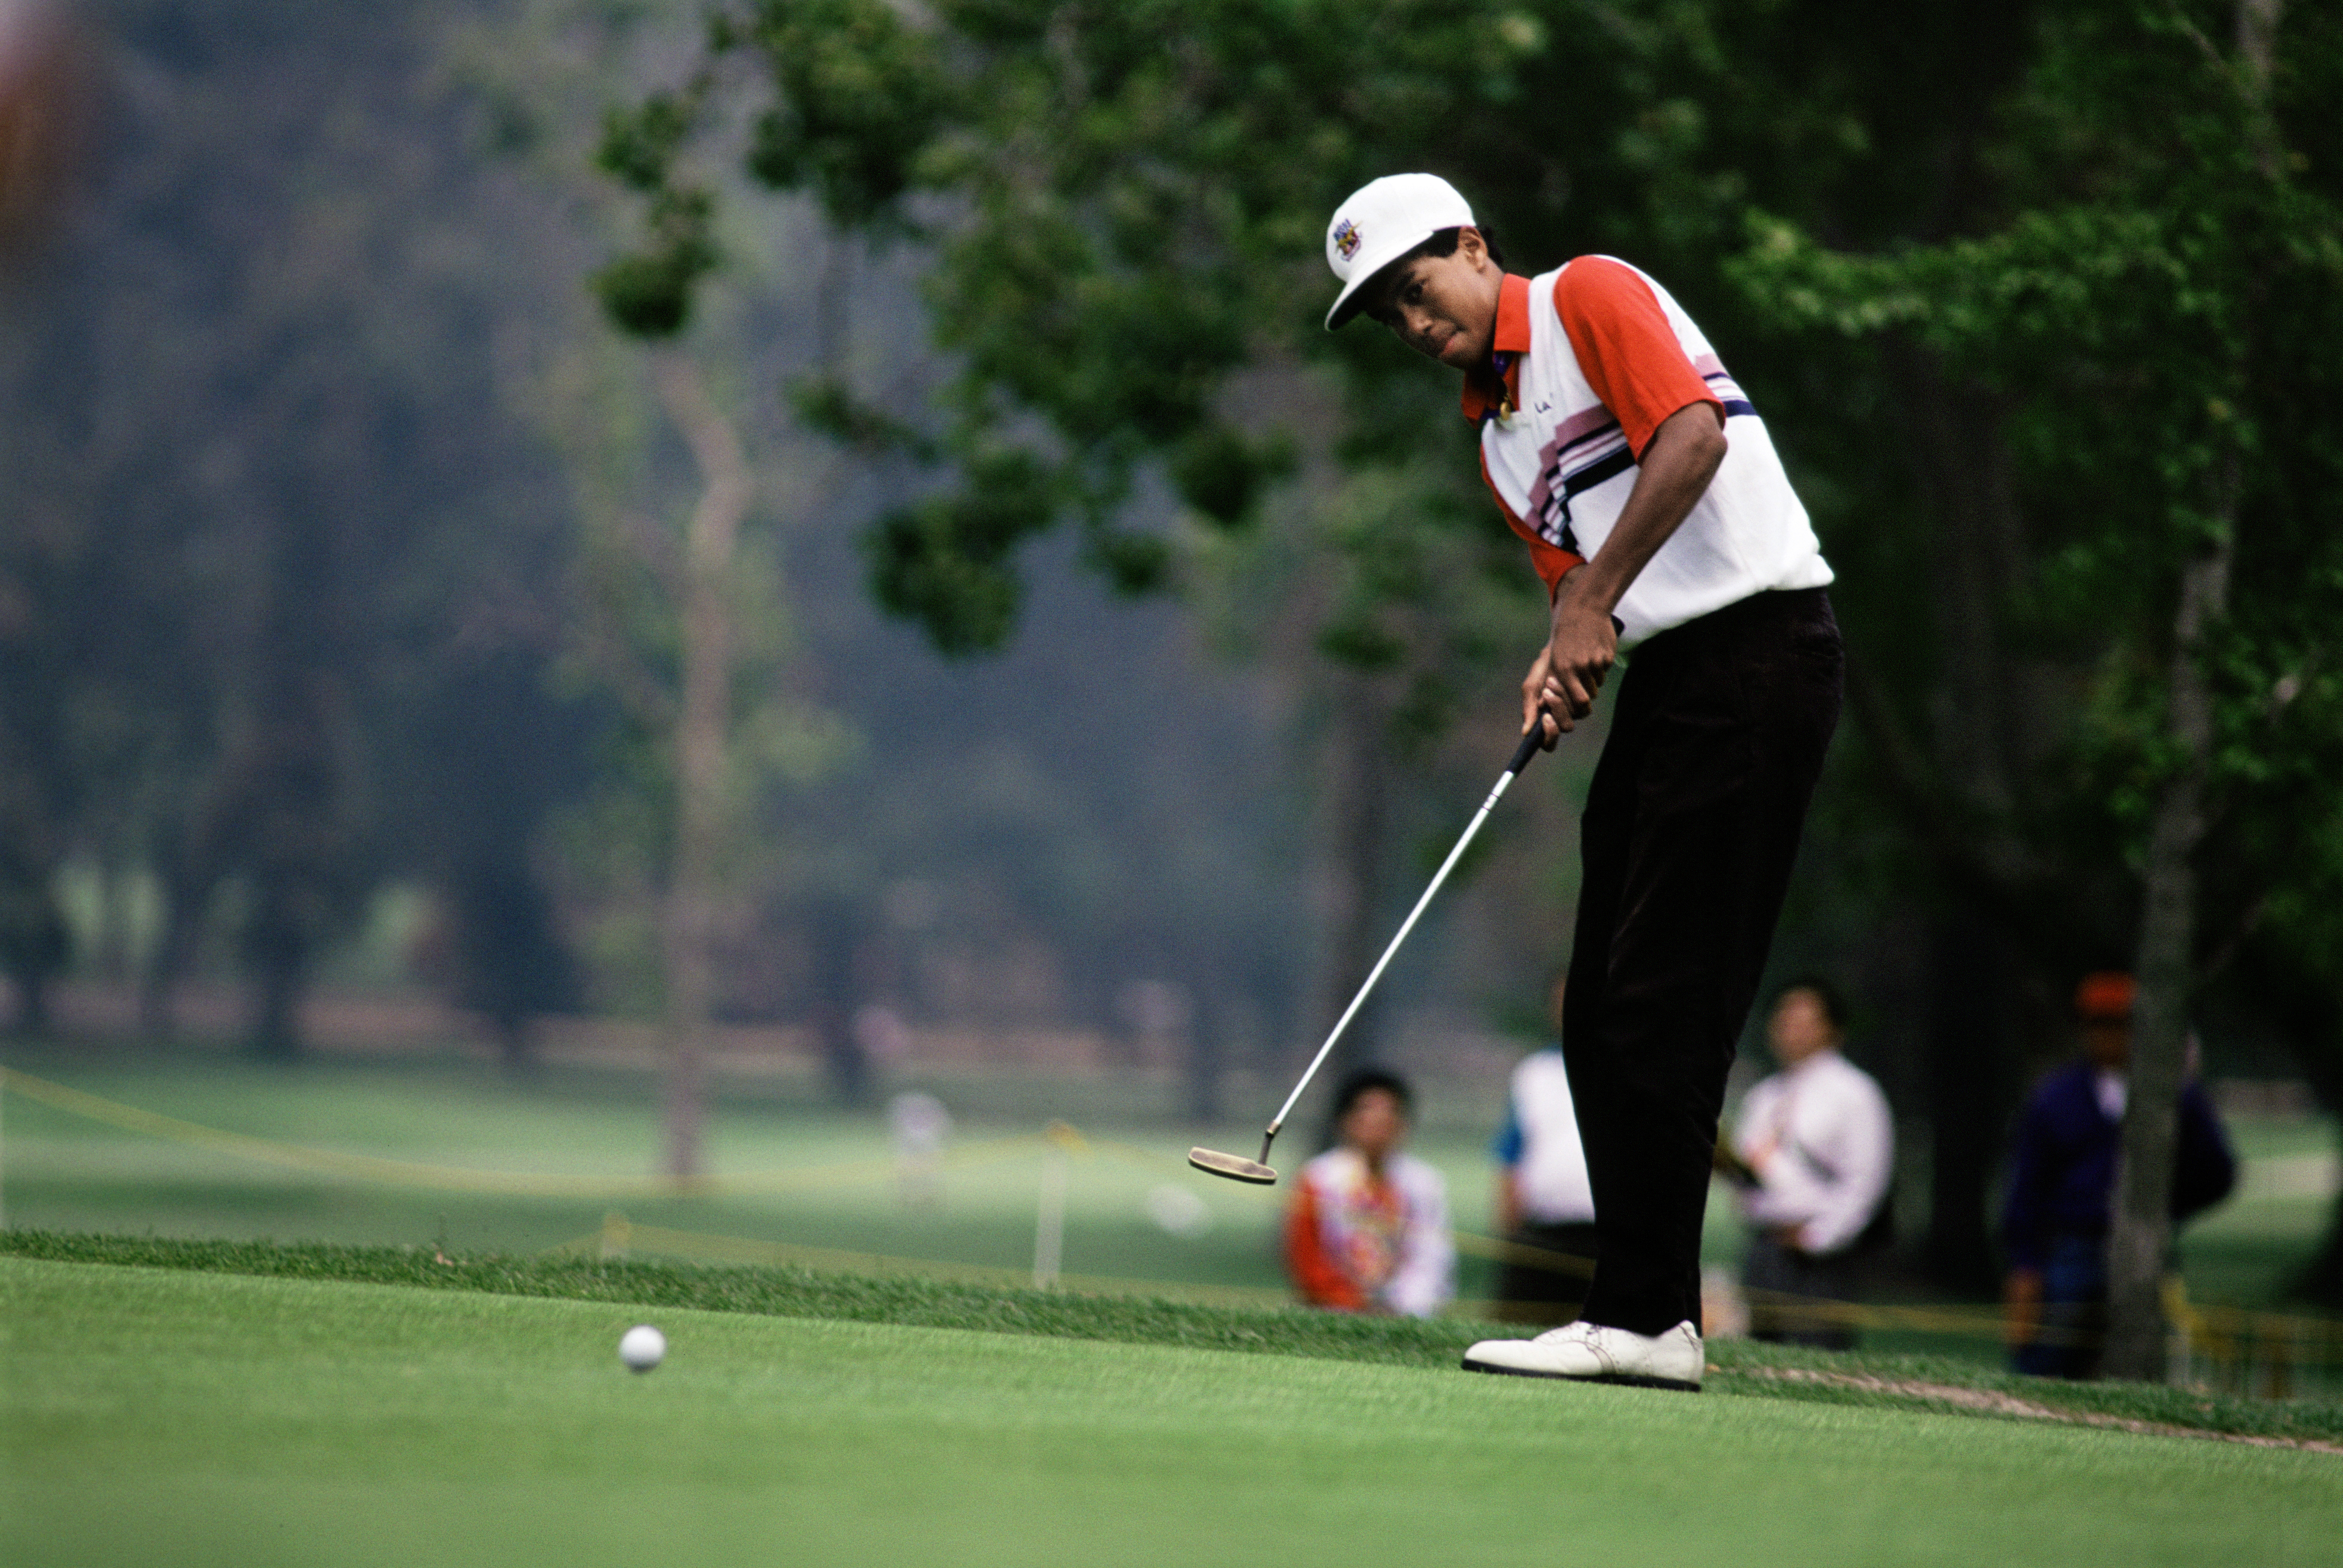 13-year-old Vietnamese golfer listed in World Amateur Golf Ranking